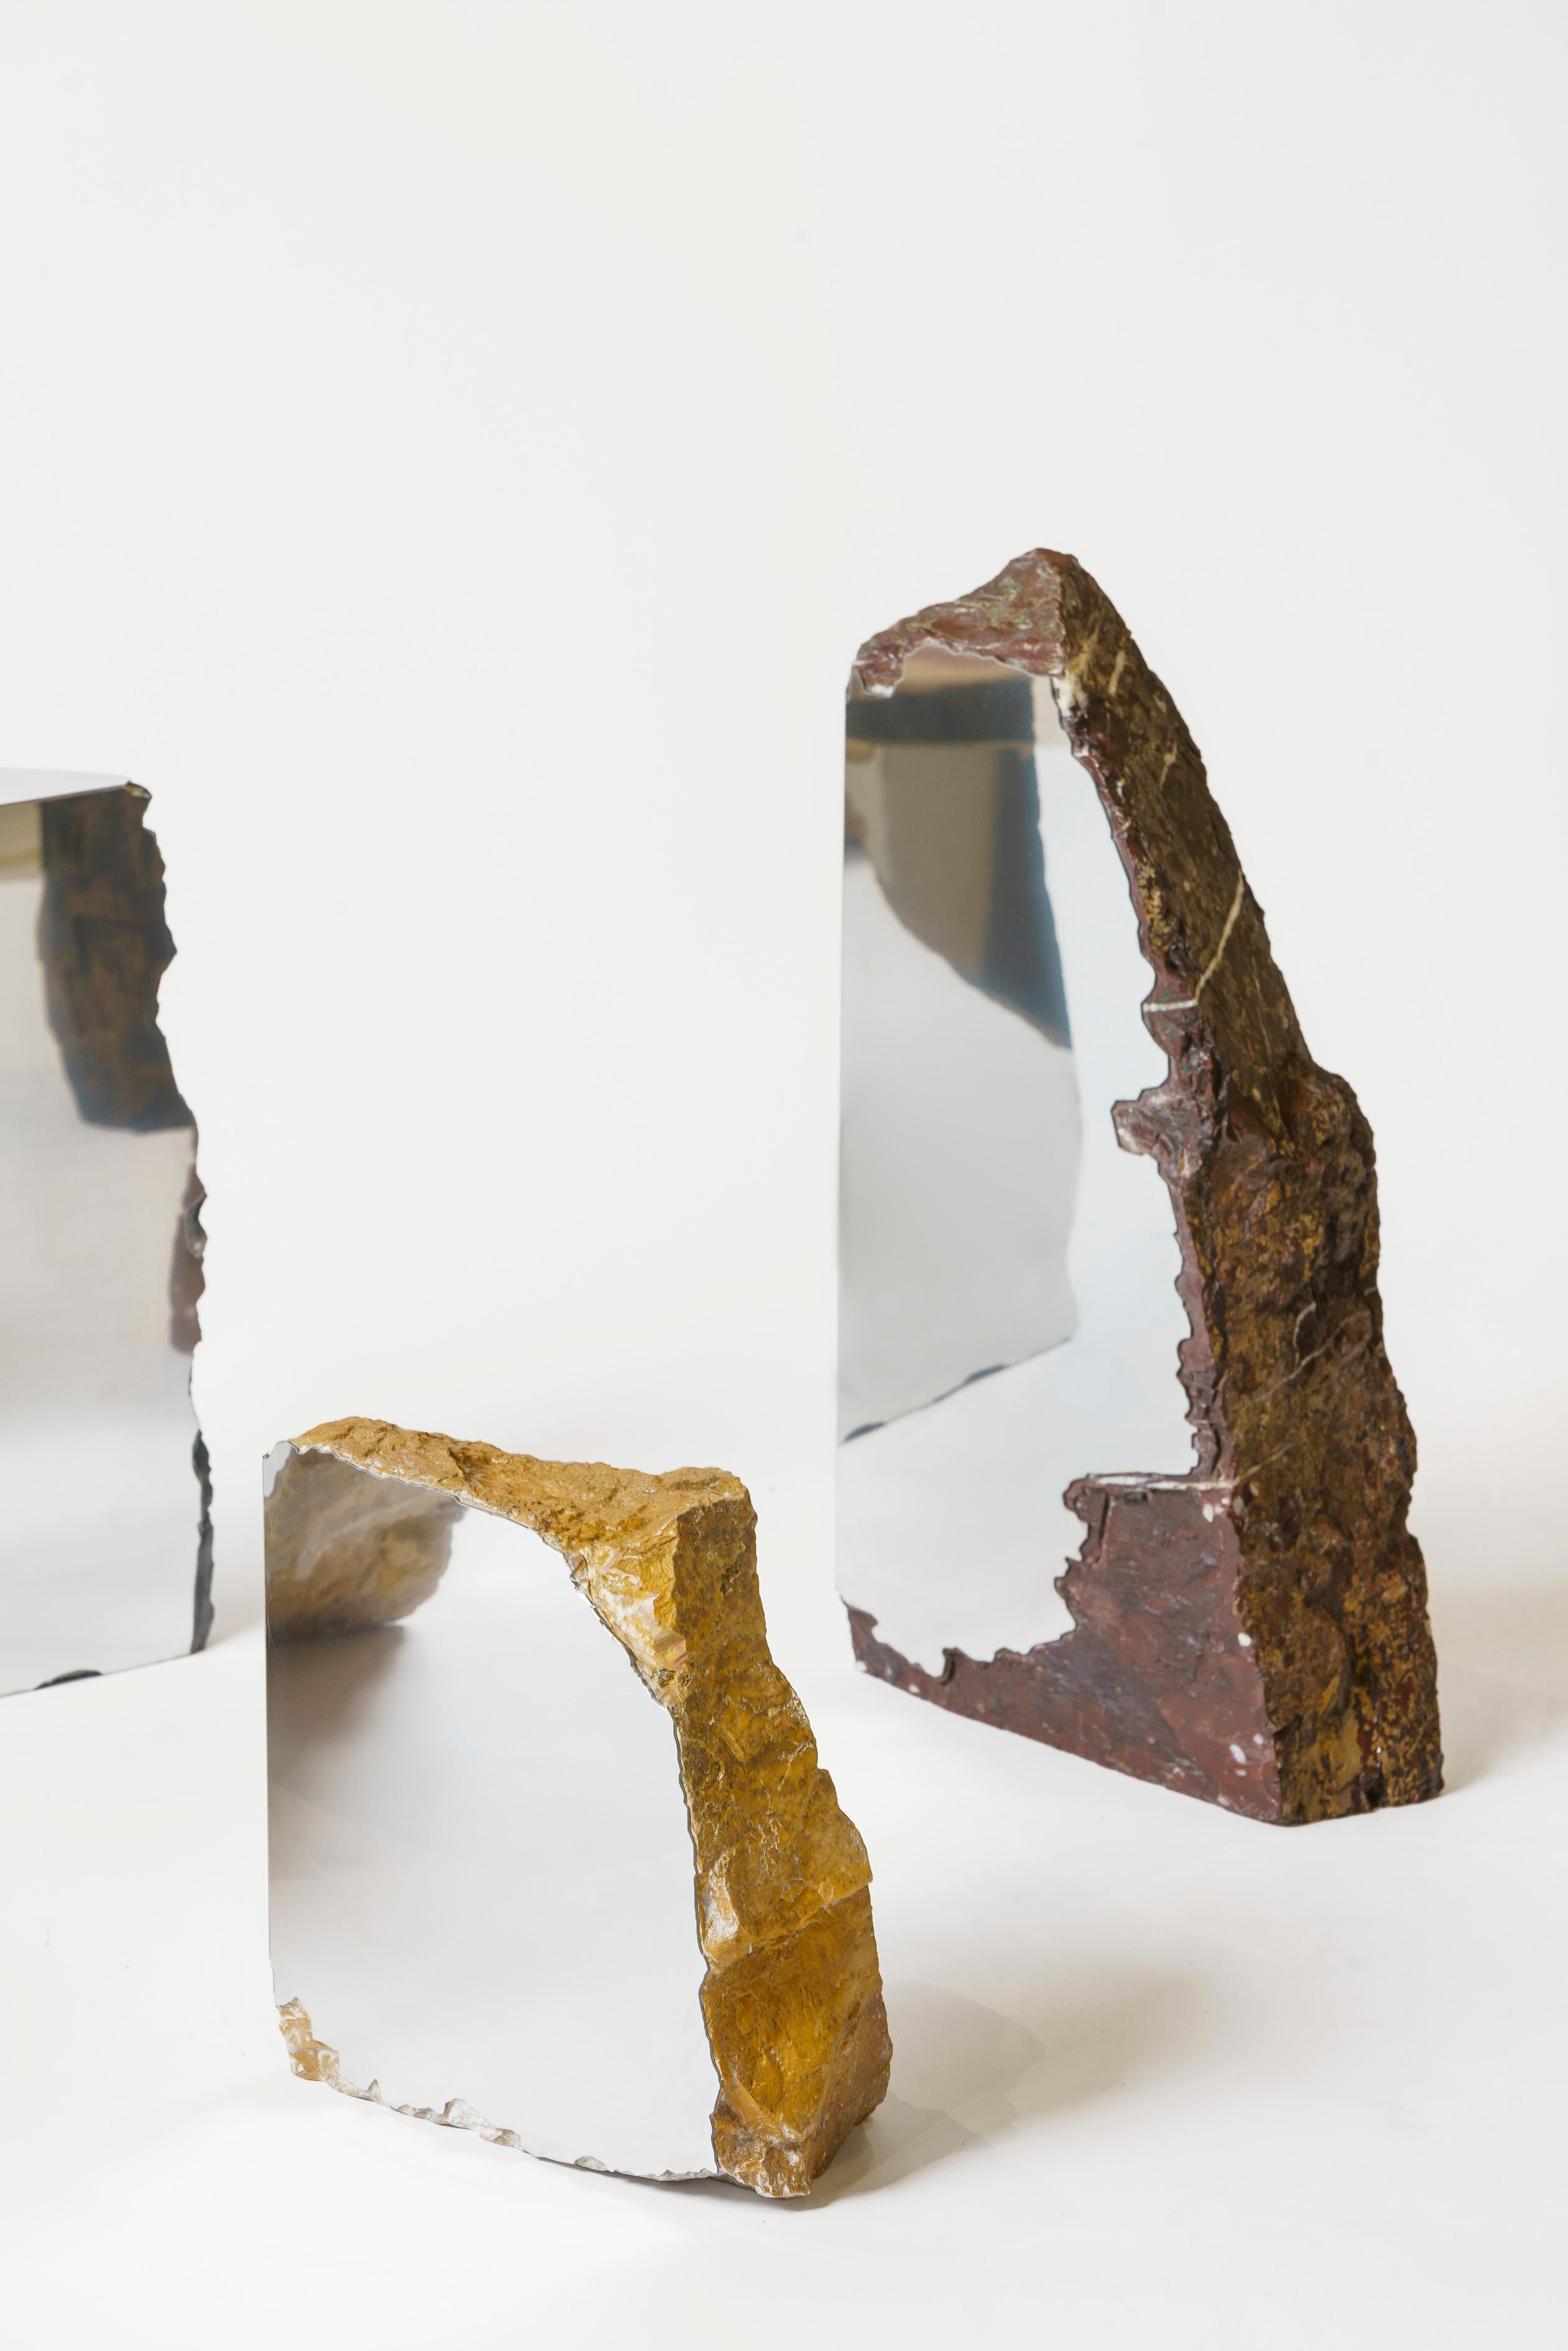 Gambi’s process is first guided by chance and intuition and then by precision and skill. He found the marble used in the collection by visiting stone yards in Carrara and searching for evocative off-cut shapes. He then translated that shape into 2D